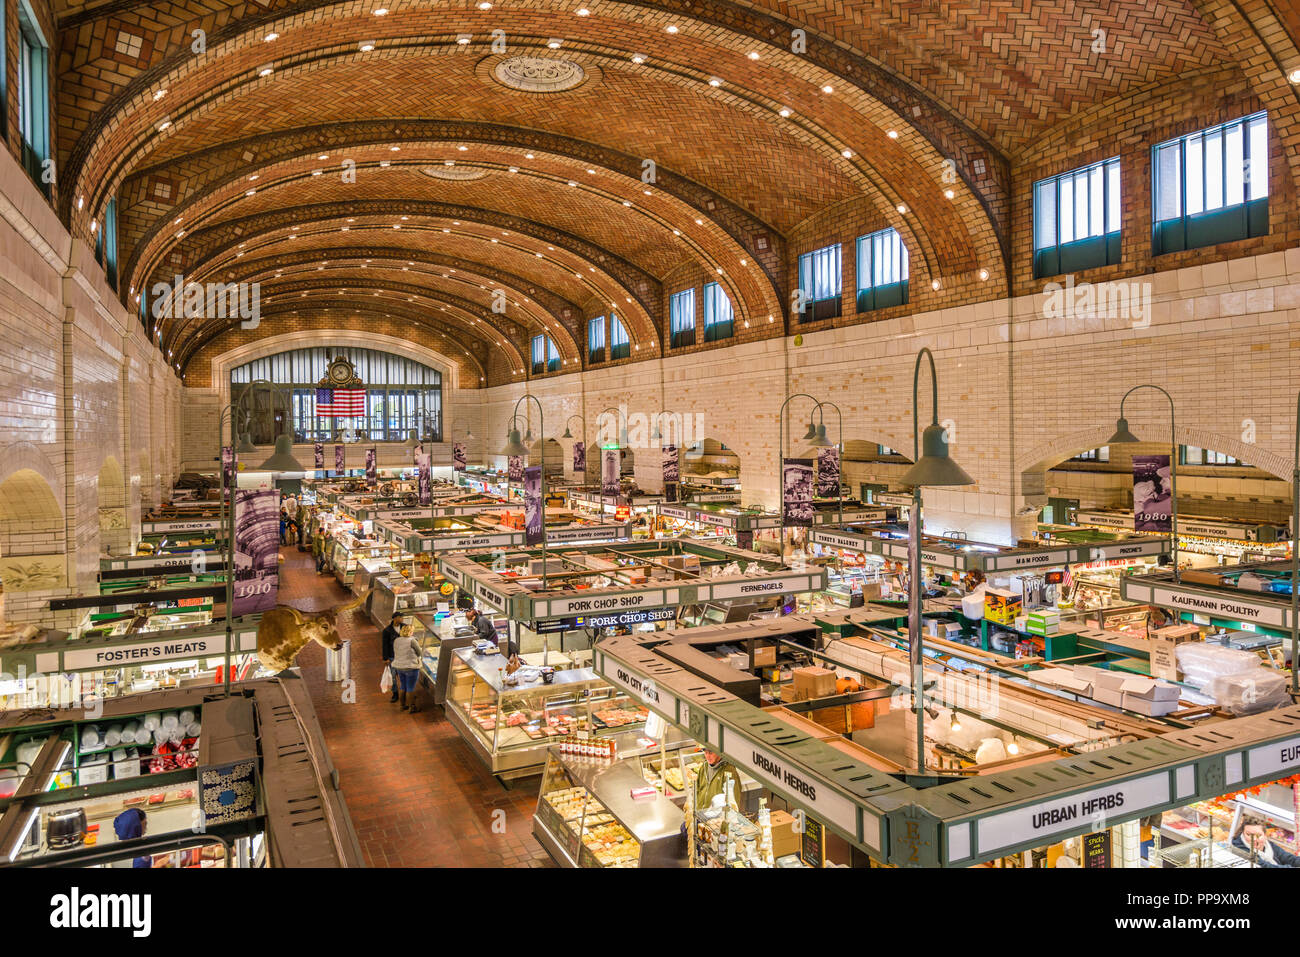 CLEVELAND, OHIO - OCTOBER 30, 2017: The West Side Market interior. It is considered the oldest operating market space in Cleveland. Stock Photo